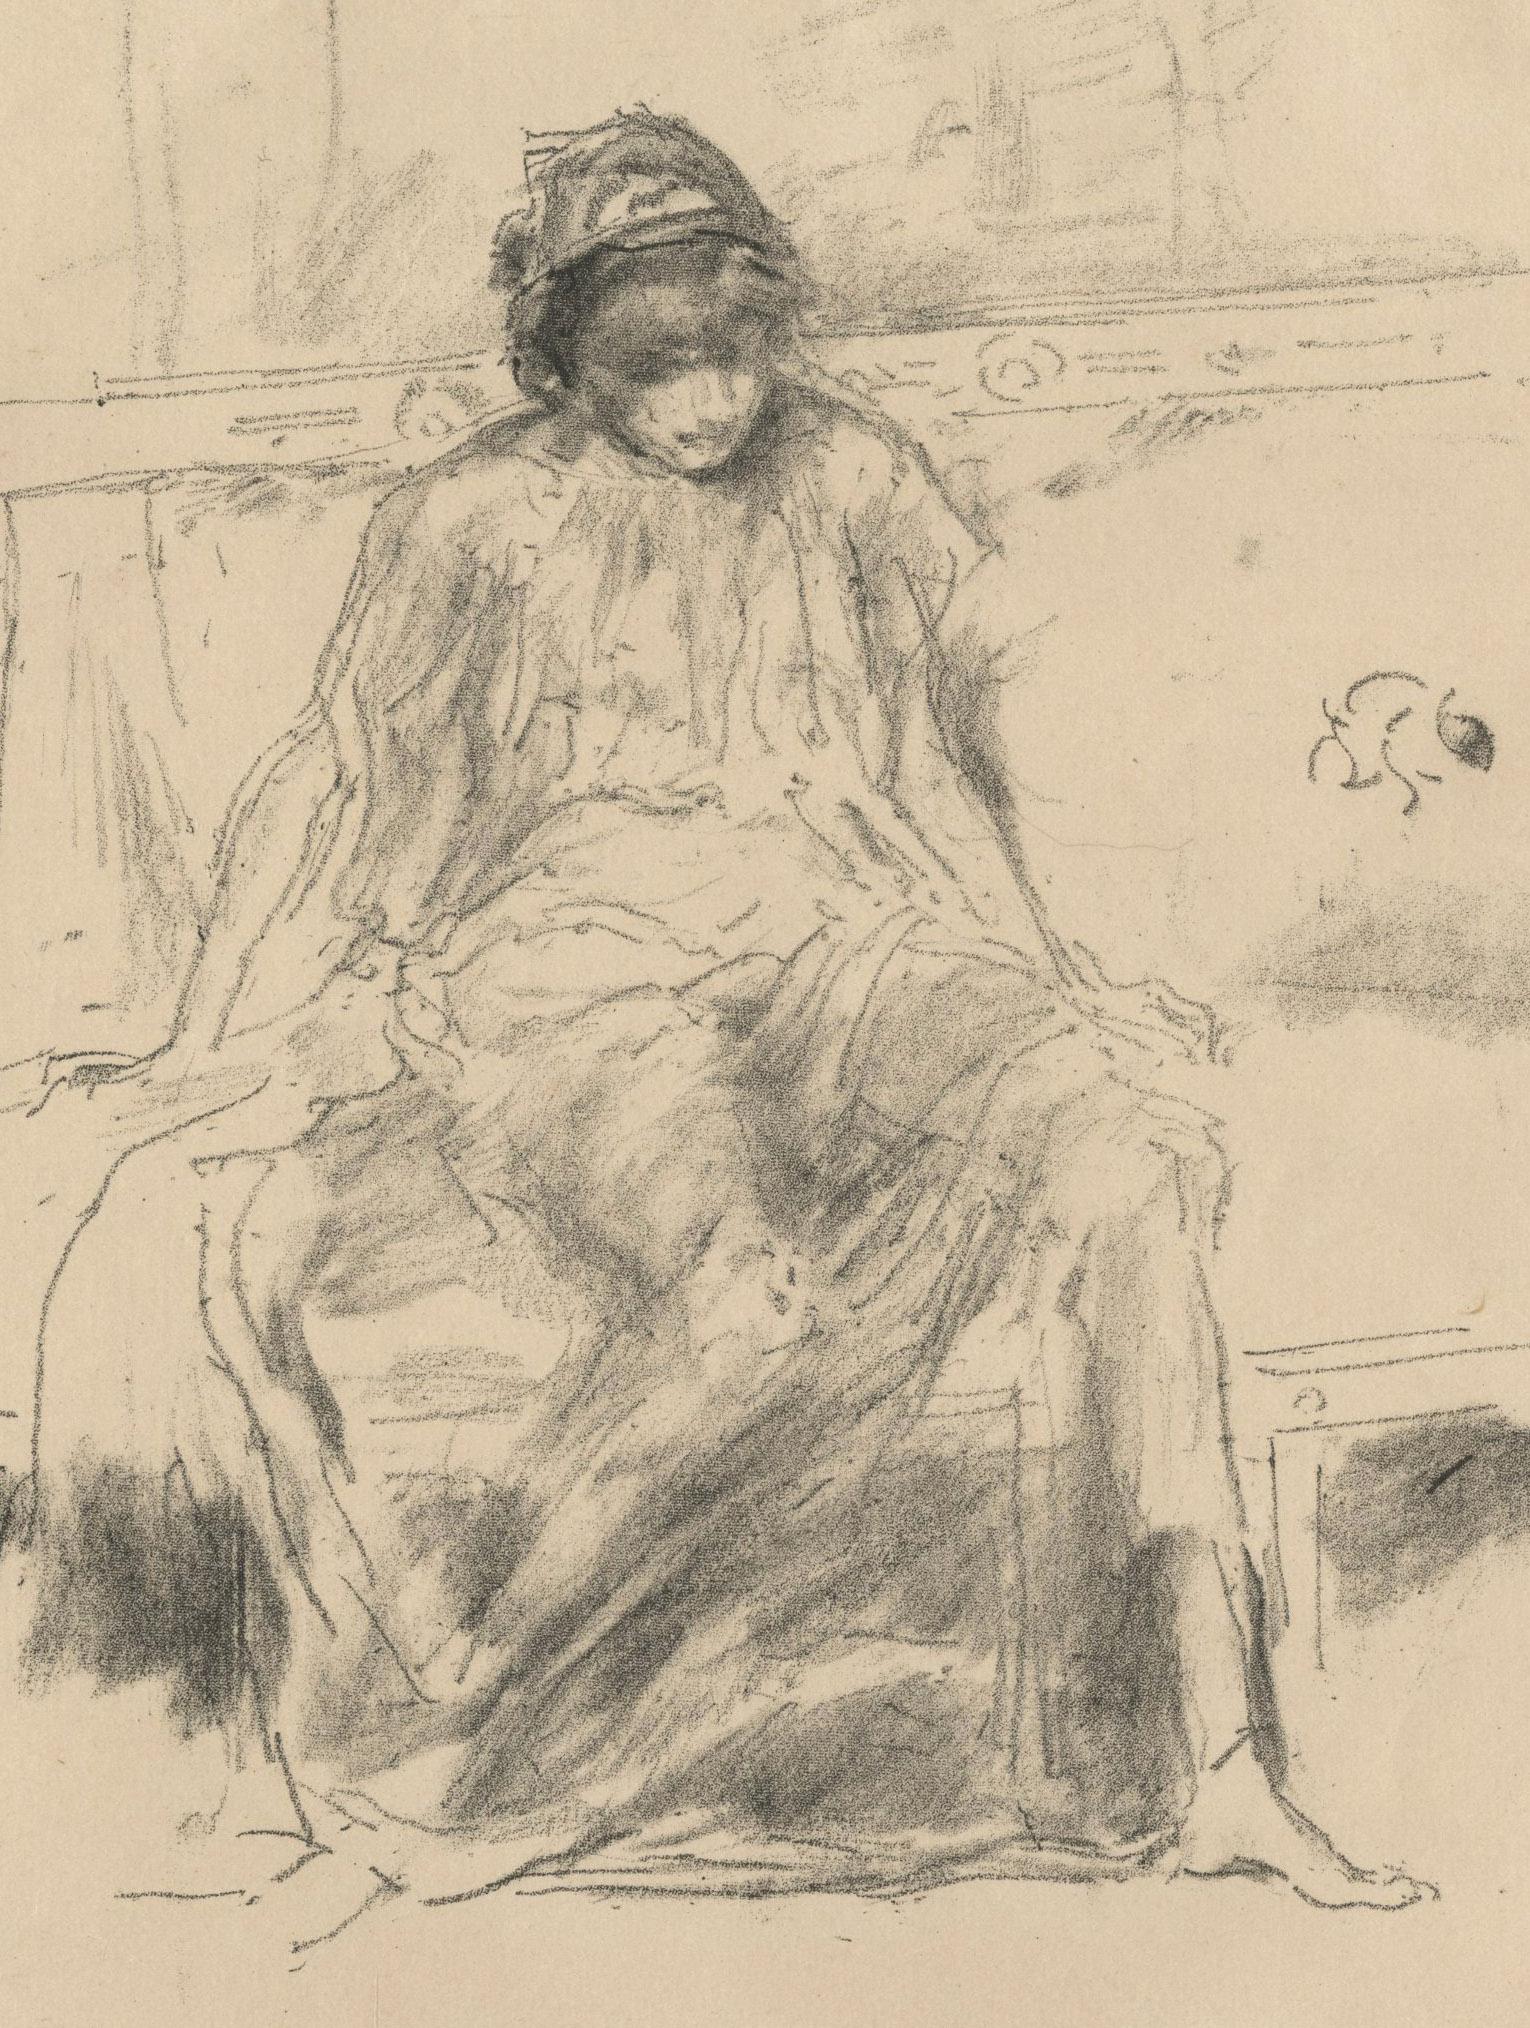 The Draped Figure, Seated - American Impressionist Print by James Abbott McNeill Whistler